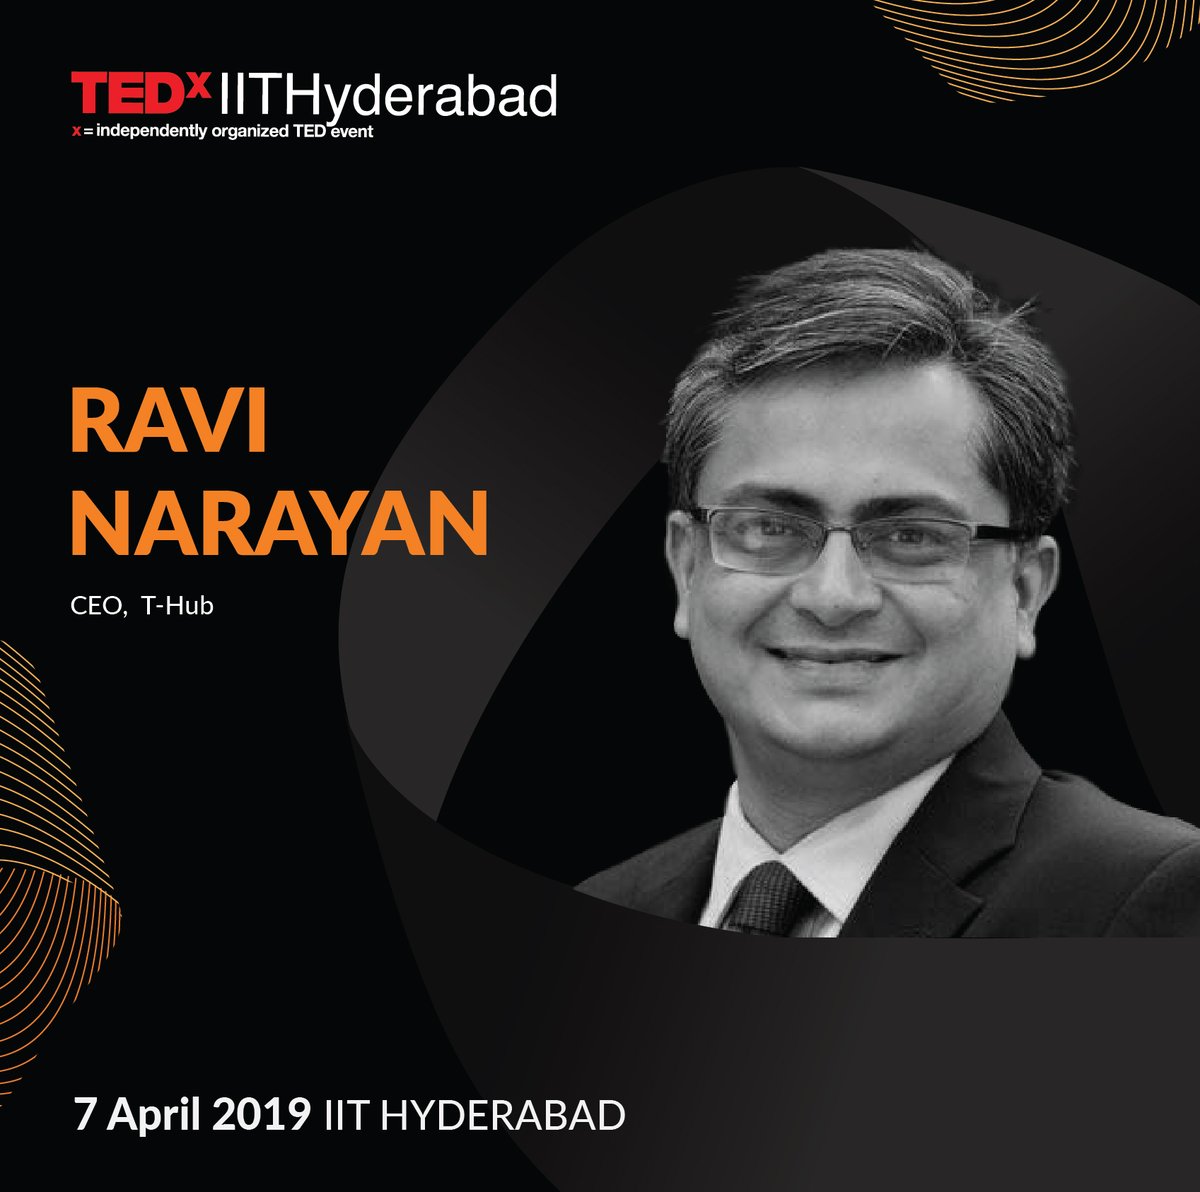 Catch @ravignarayan , CEO @THubHyd at @TEDxIITH 2019 - on April 7th, IIT Hyderabad. For registrations visit: tedxiithyderabad.com

#VisionsOfTime #TEDxIITHyderabad #innovations #entrepreneurship 
#InnovateWithTHub